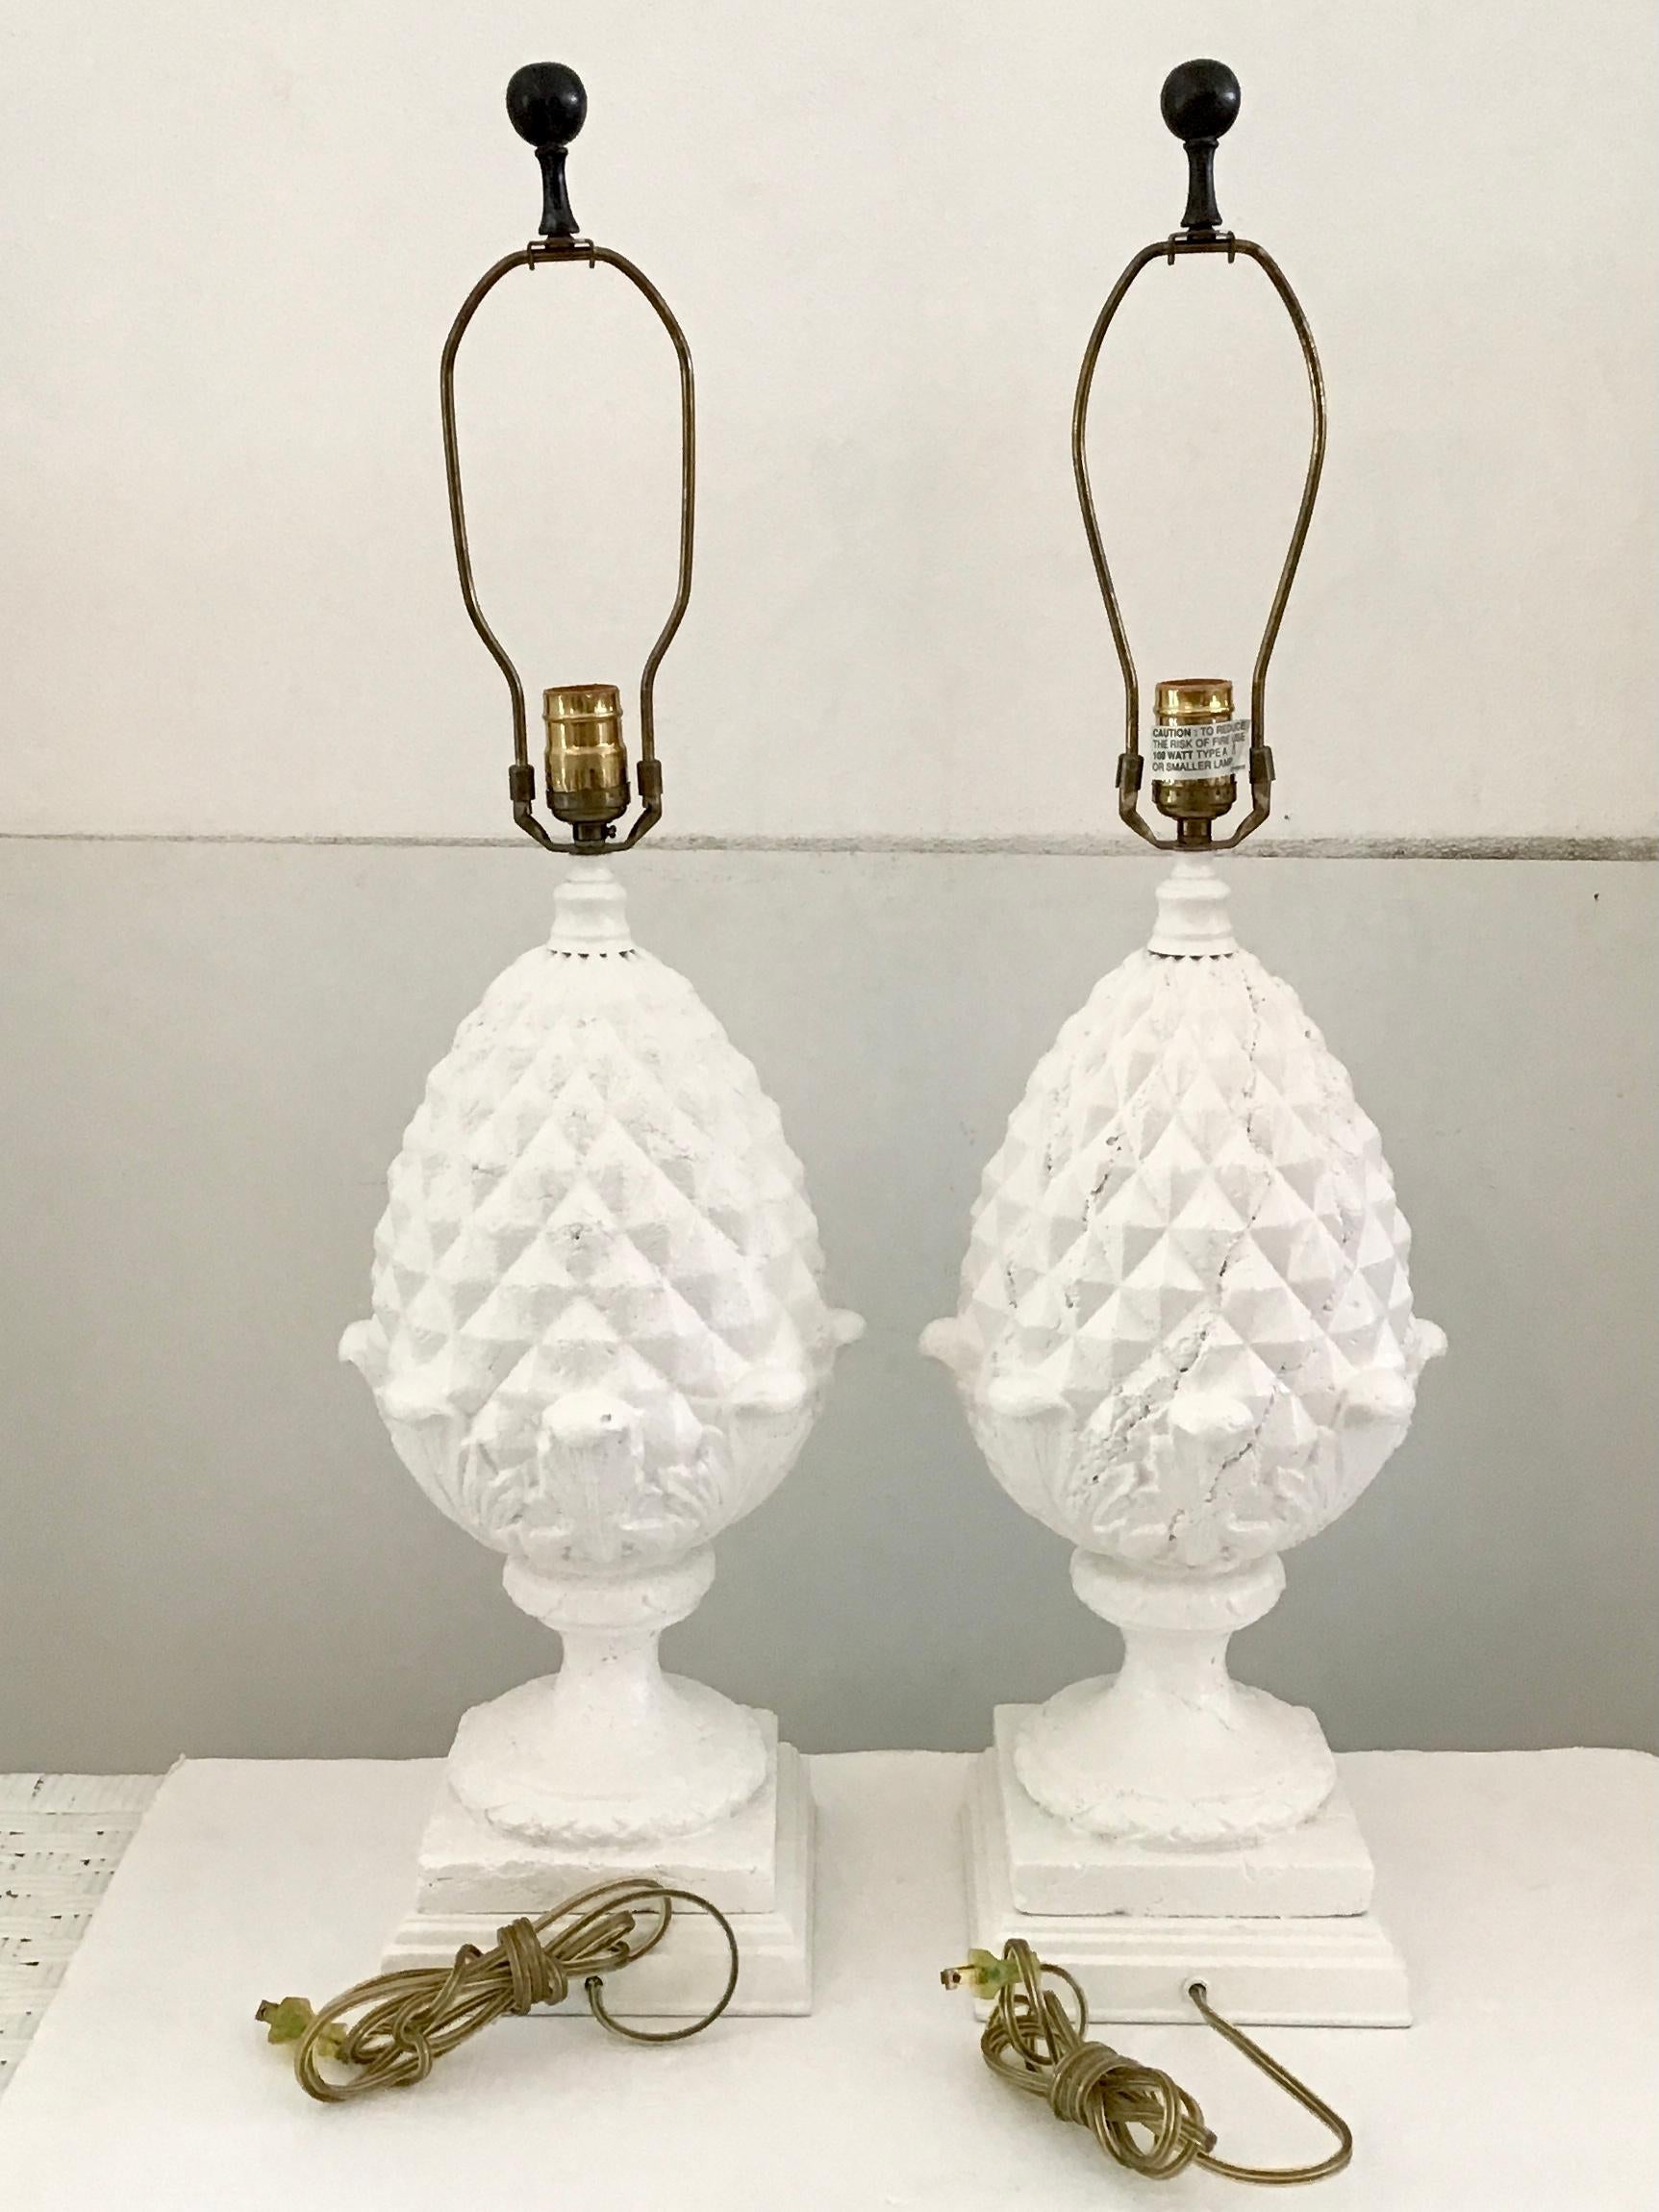 Mid-20th Century Pineapple Table Lamps in Fresh White Finish, a Pair For Sale